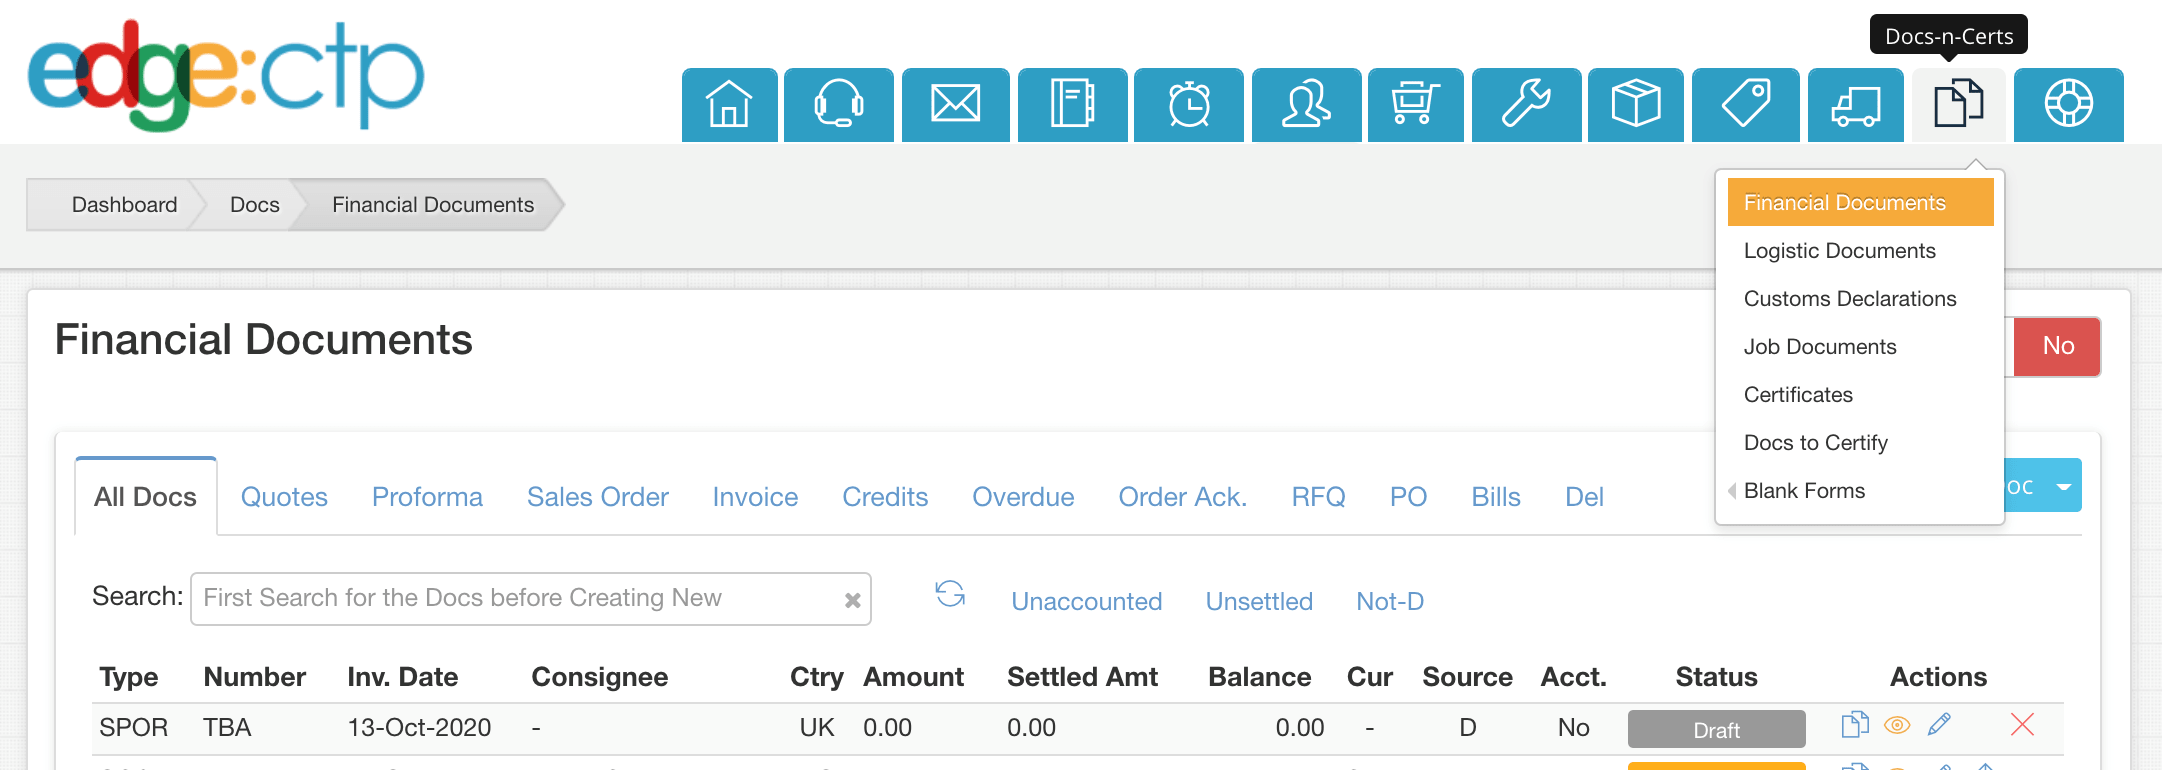 EdgeCTP-Financial-Documents